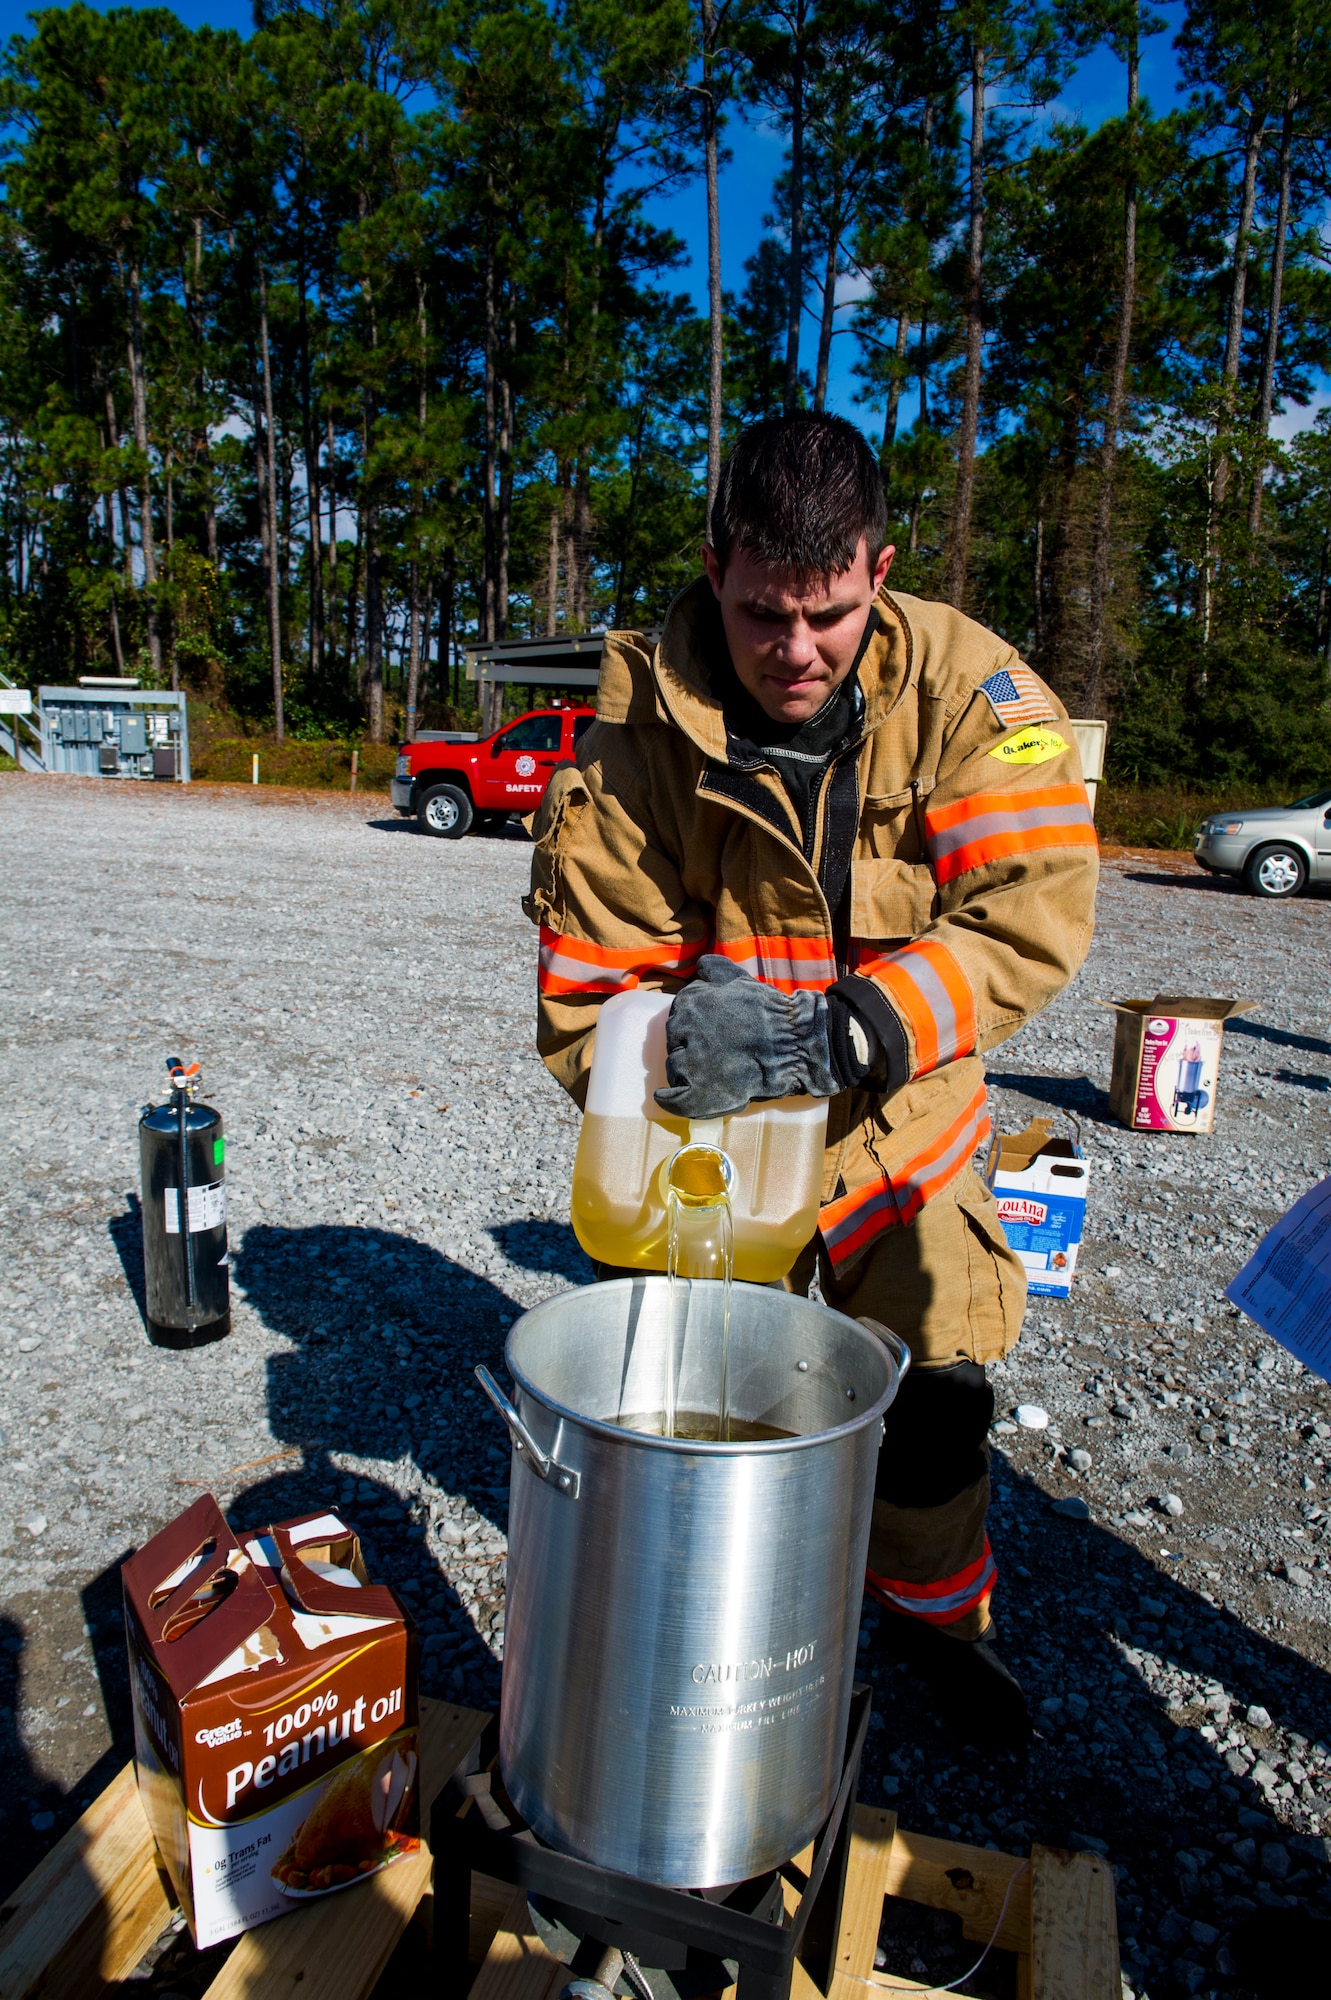 Staff Sgt Glenn Rodgers, 1st Special Operations Civil Engineer Squadron fire inspector, fills a turkey fryer with cooking oil during a safety demonstration at the fire training area on Hurlburt Field, Fla., Nov. 27, 2013. Deep-frying turkeys has recently grown in popularity and the tradition prompts fire safety concerns. (U.S. Air Force photo/Senior Airman Christopher Callaway)